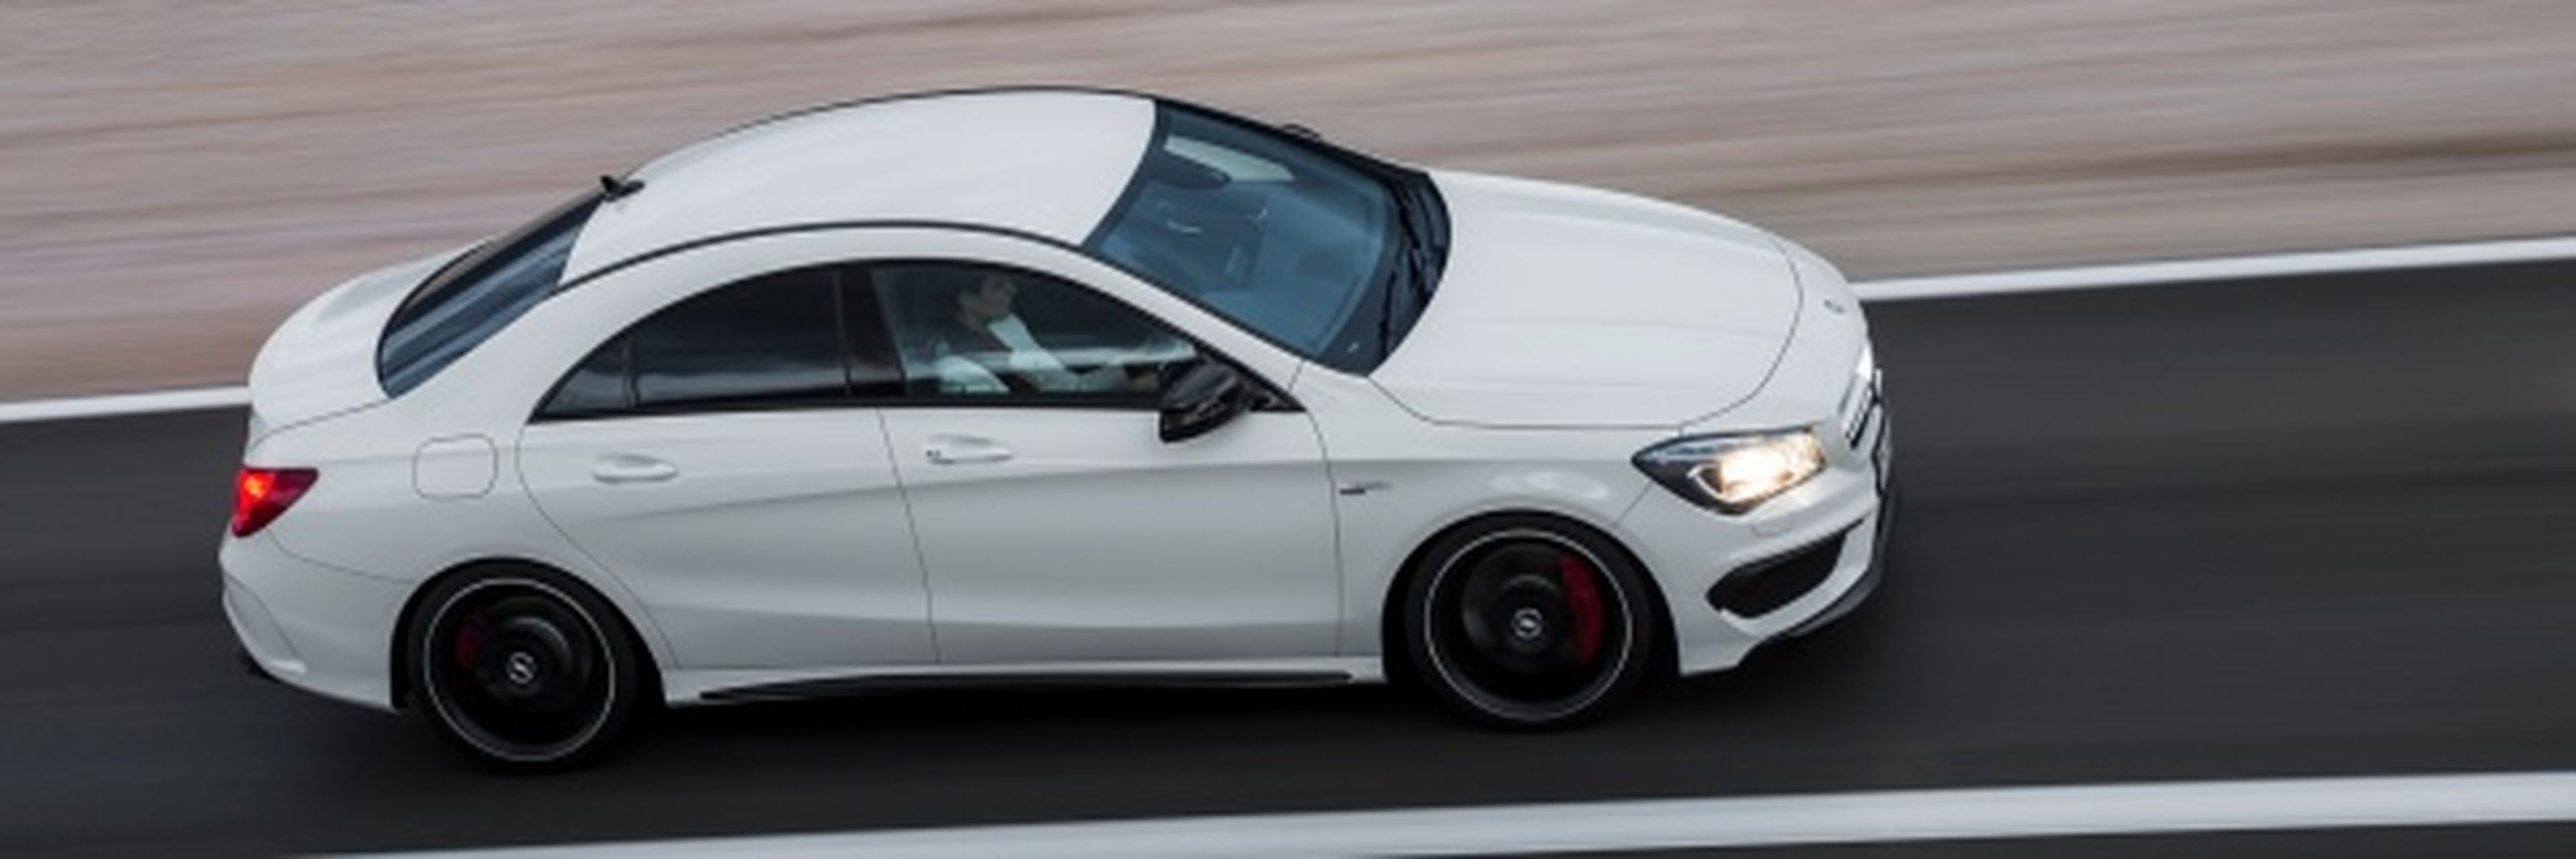 Mercedes CLA 45 AMG lateral